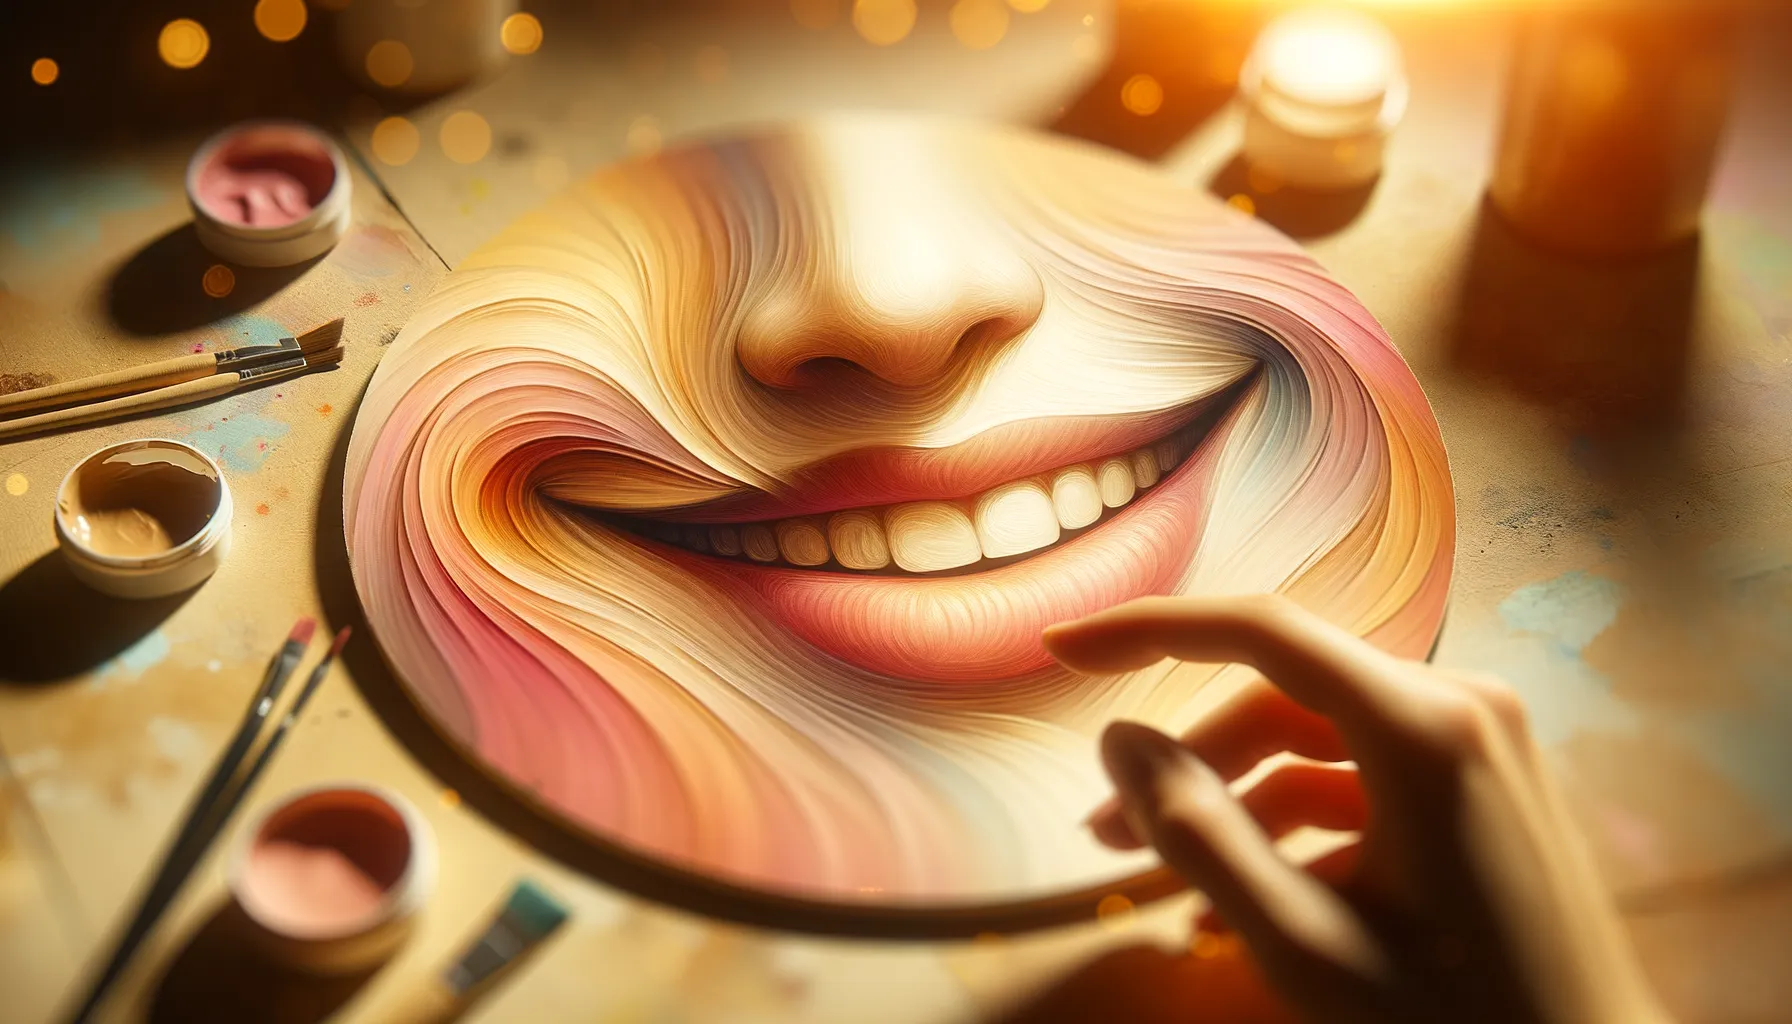 The Radiance of Connection: An abstract representation of a captivating smile that bridges the gap between hearts, echoing the warmth and joy of newfound attraction.